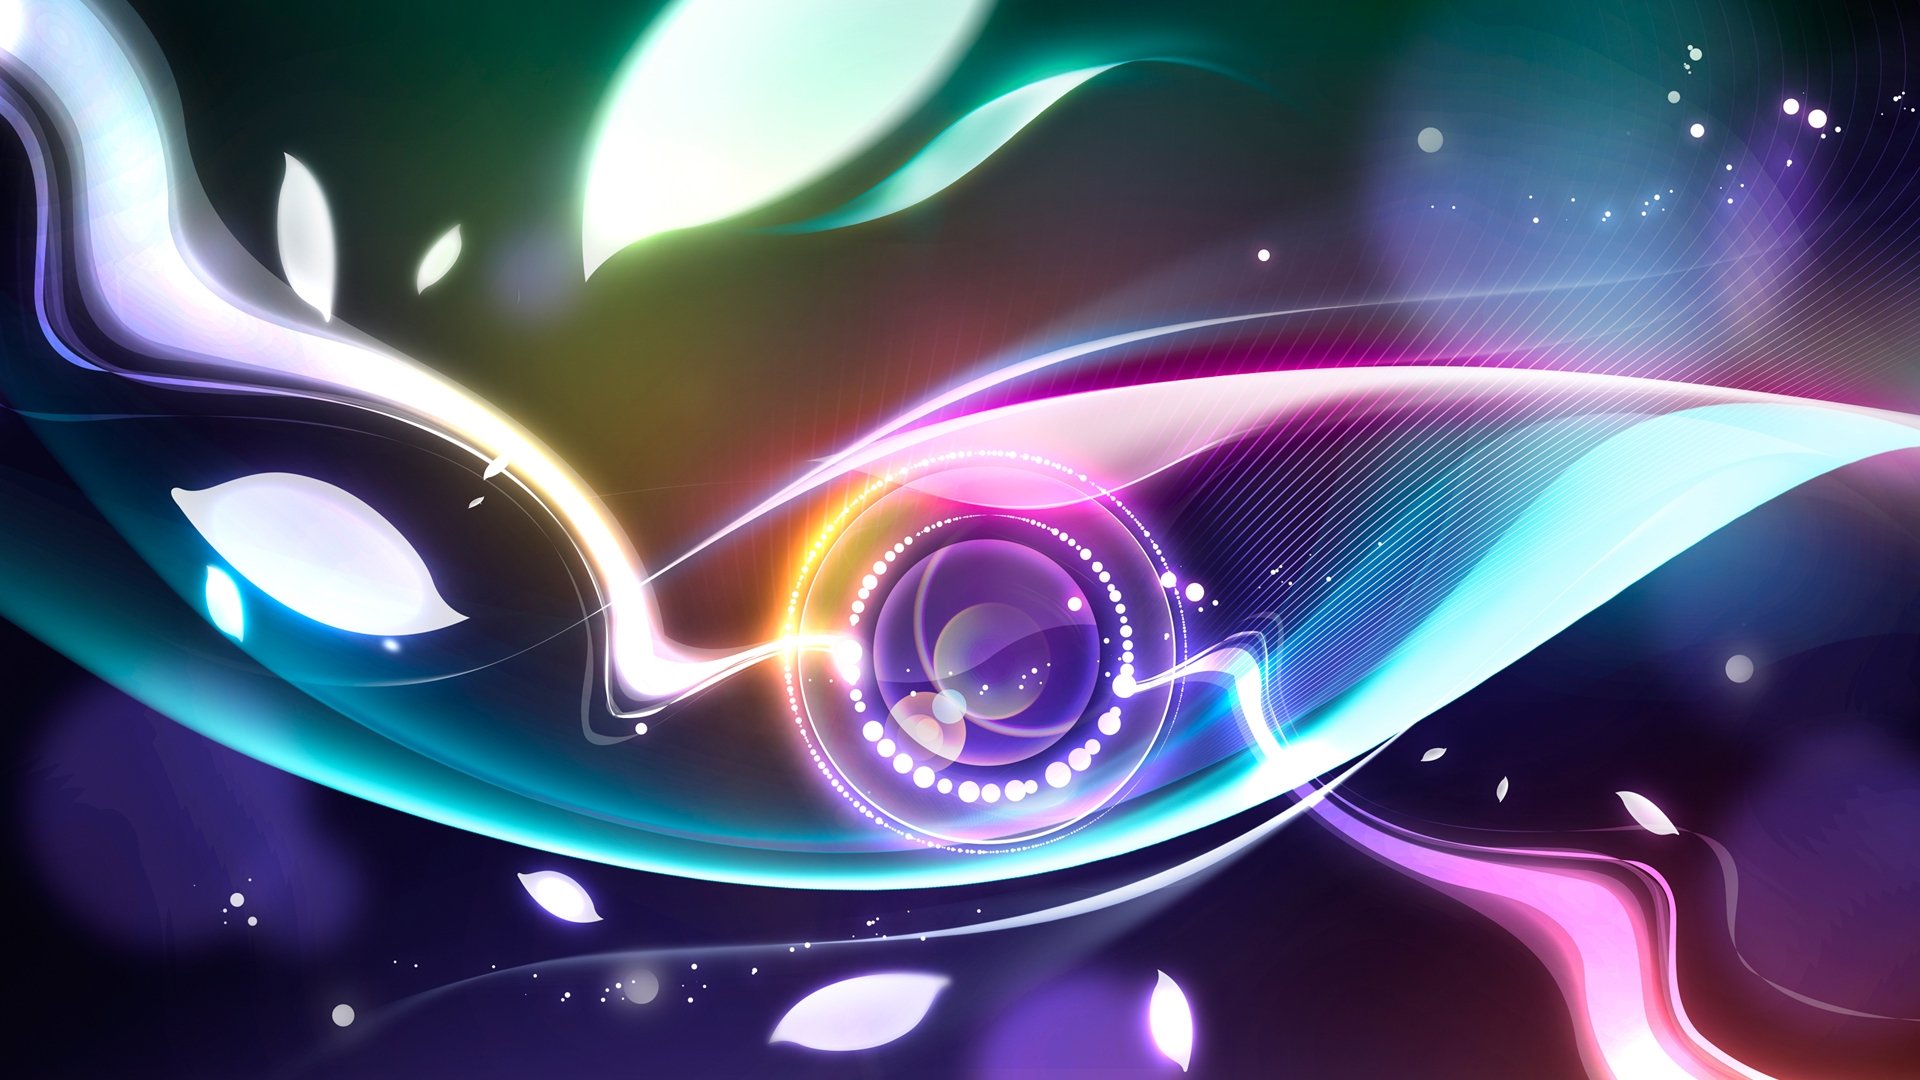 abstract, Art, Colorful, Colors, Design, Illustration, Light, Theme Wallpaper